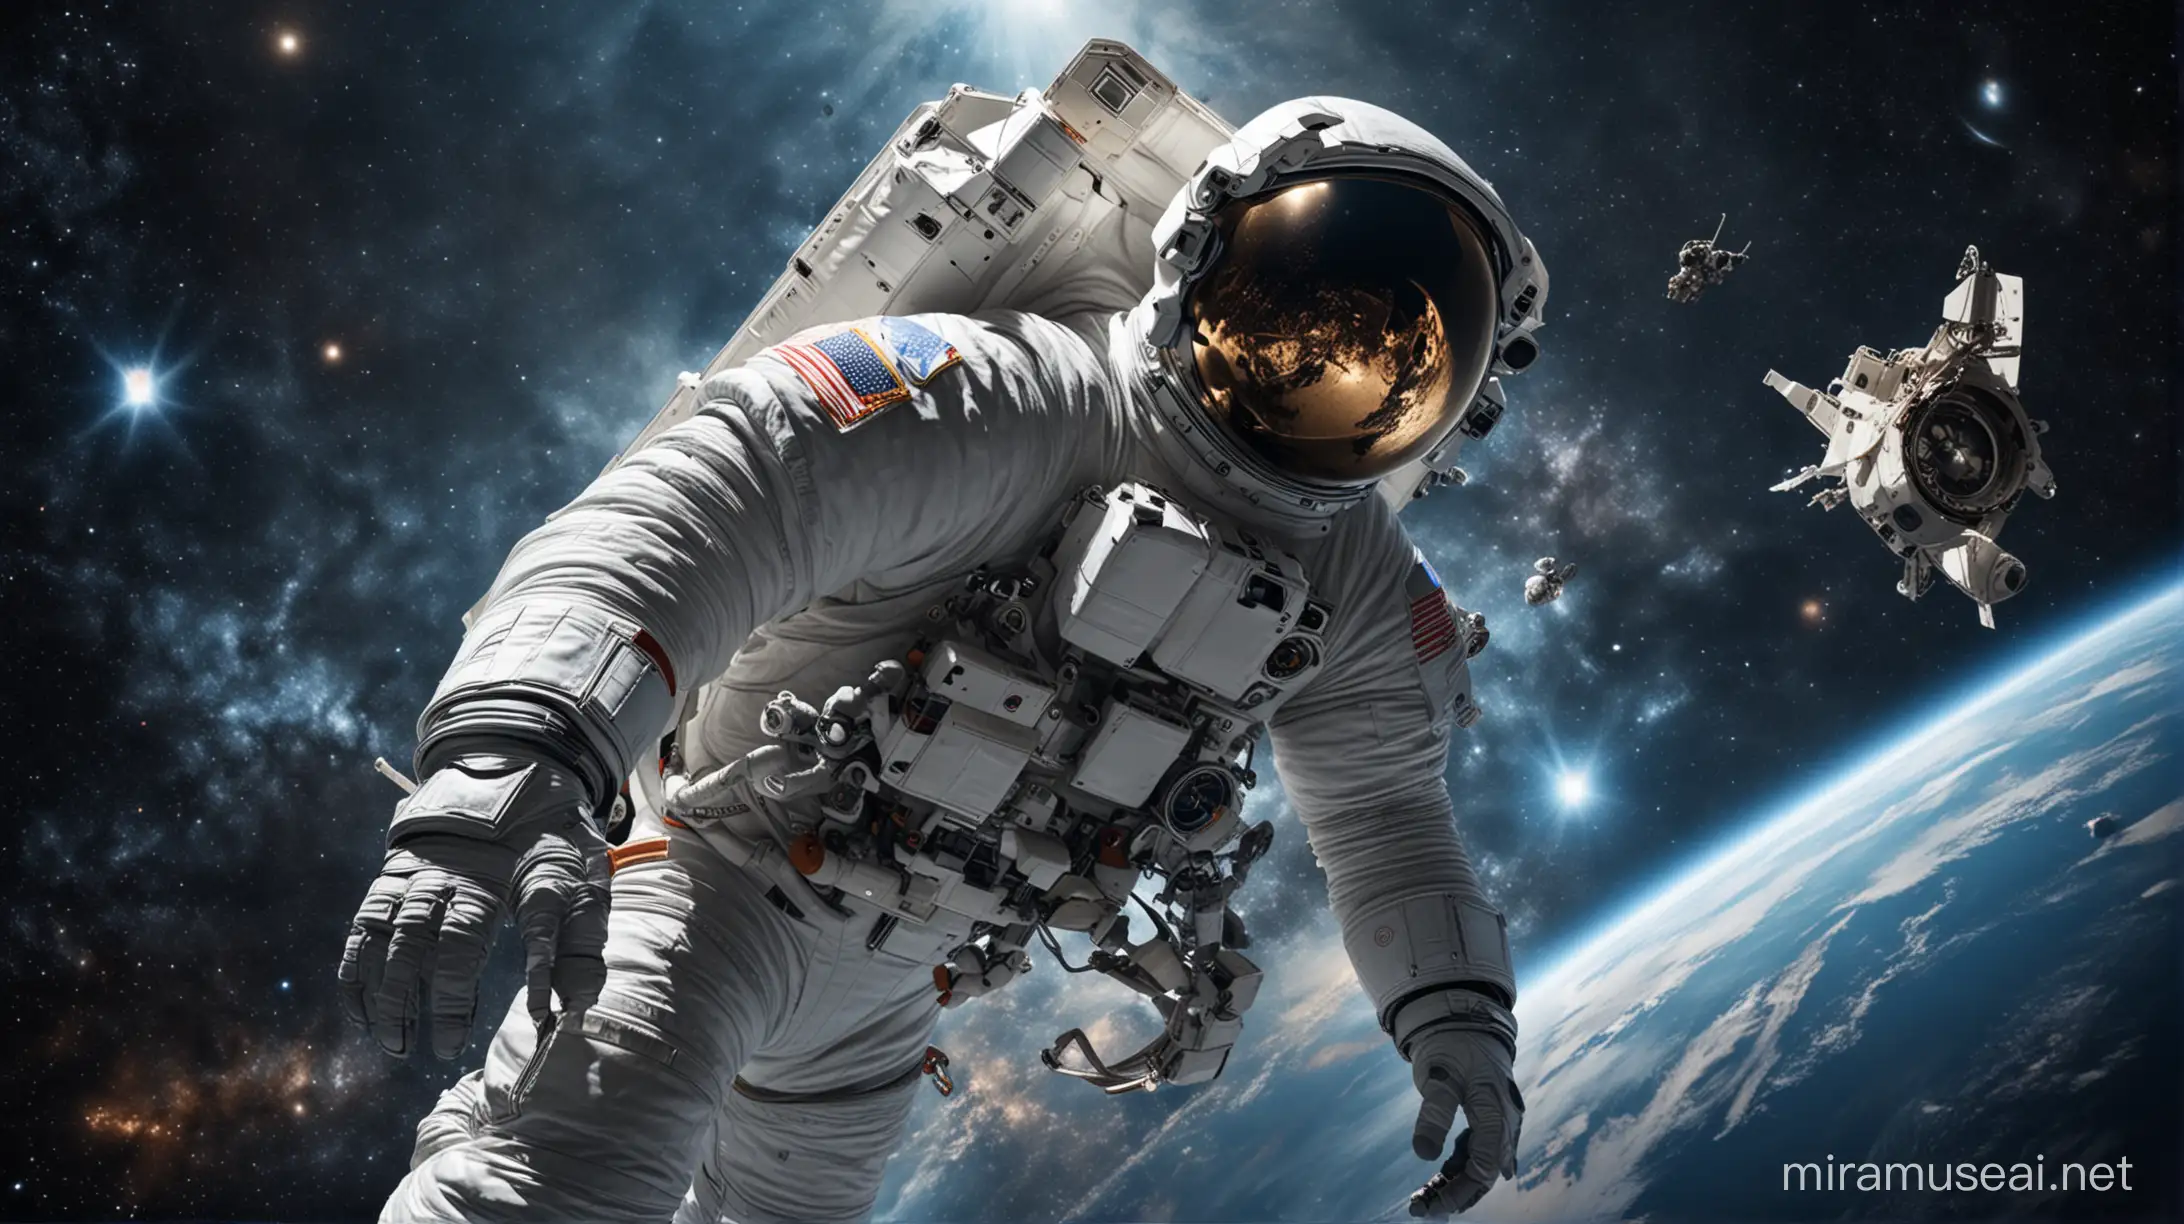 Astronaut in Spacesuit Floating in Open Space with Universe and Spacecraft